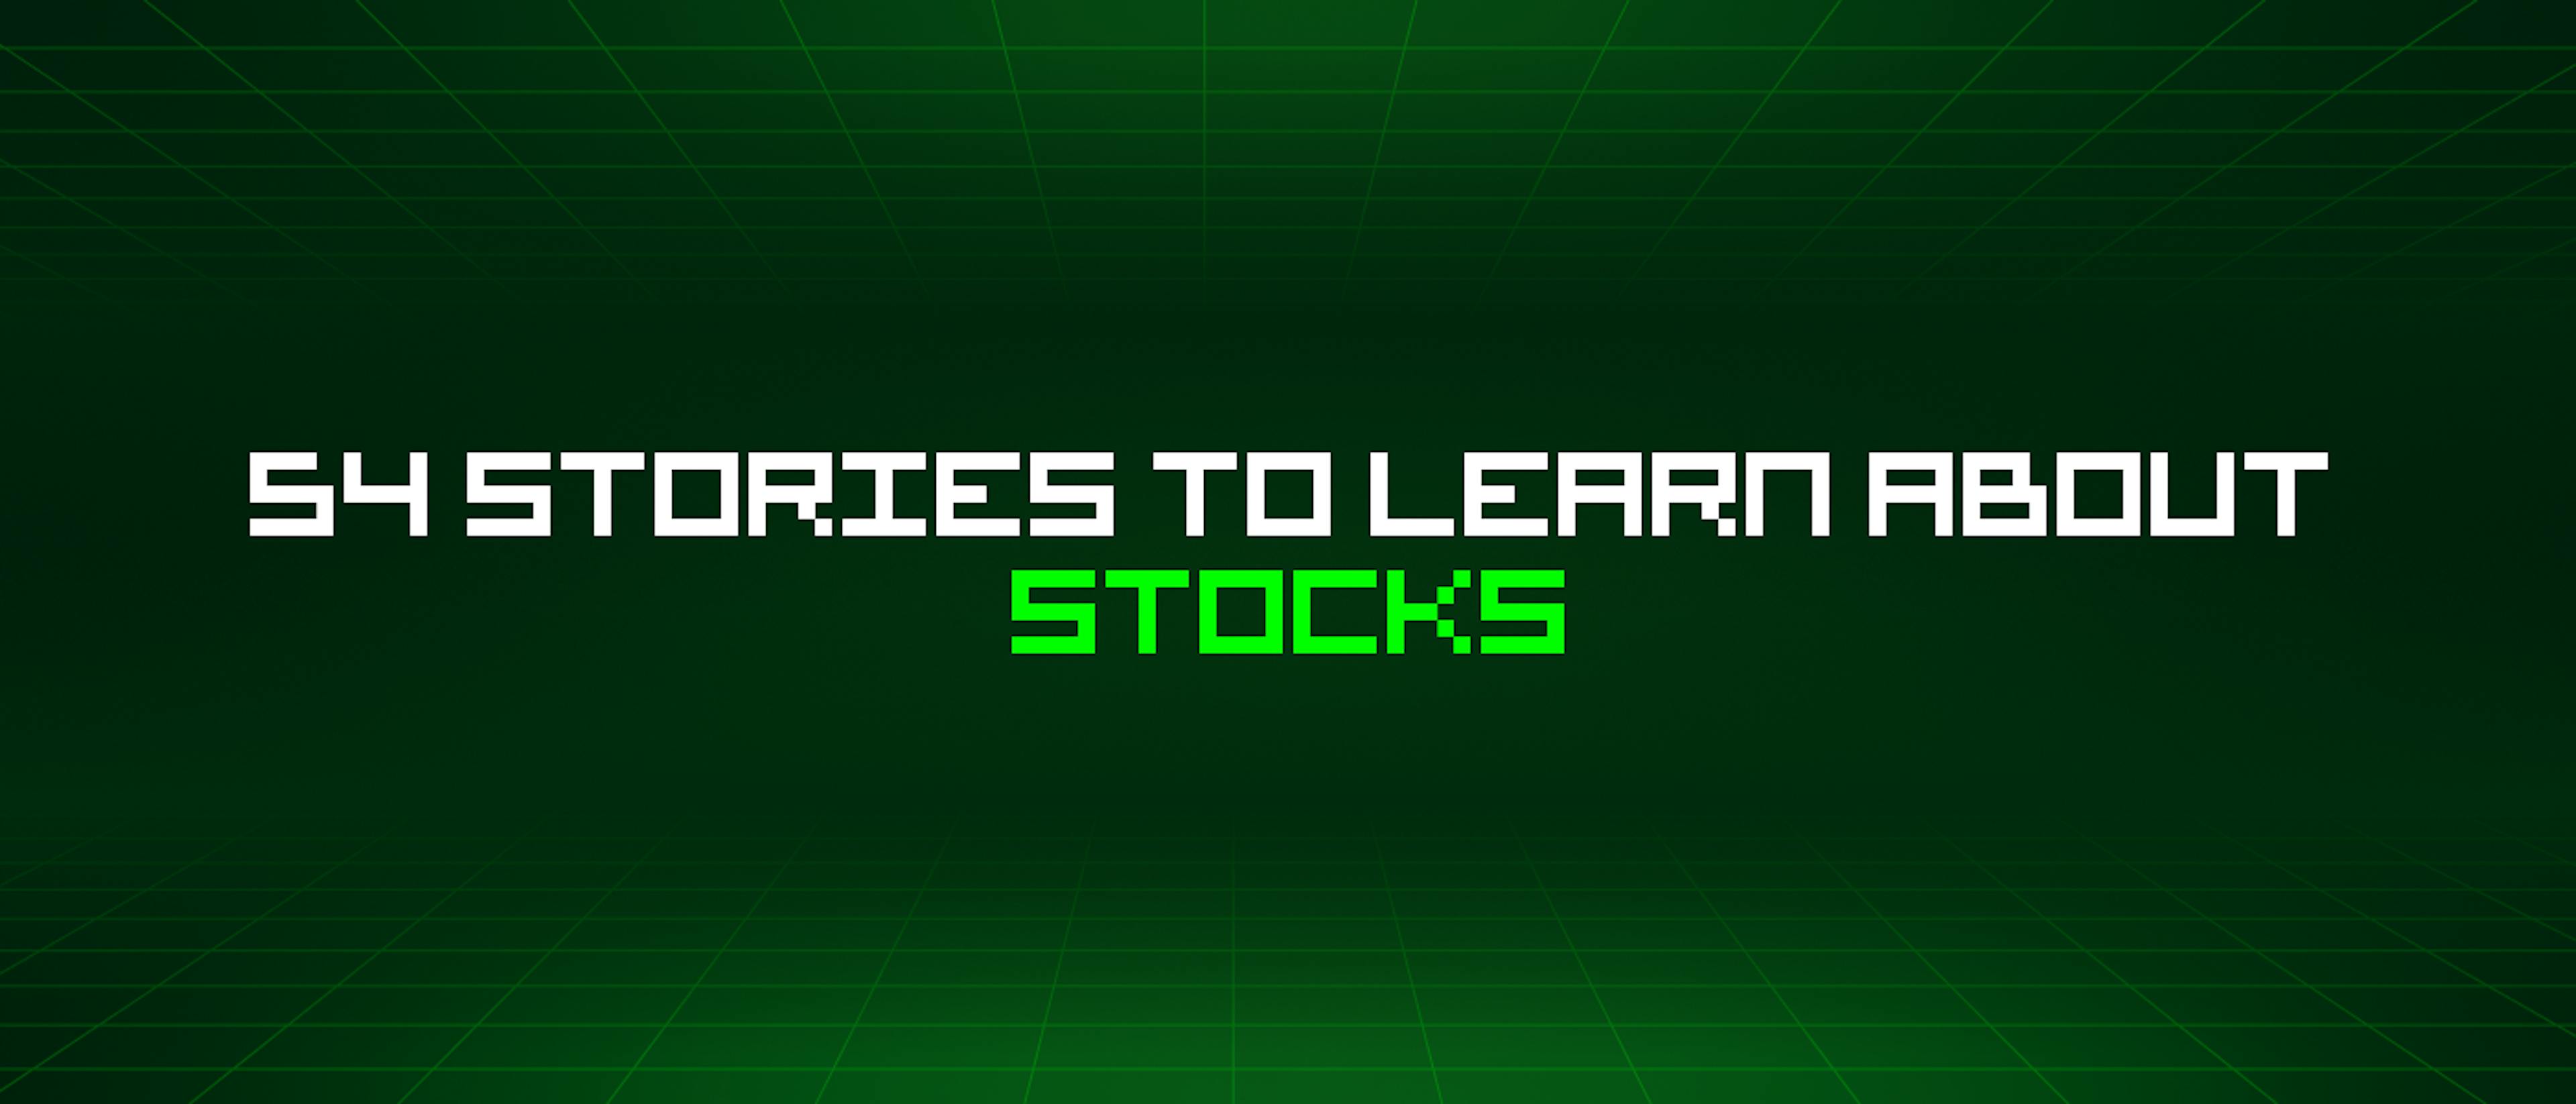 featured image - 54 Stories To Learn About Stocks